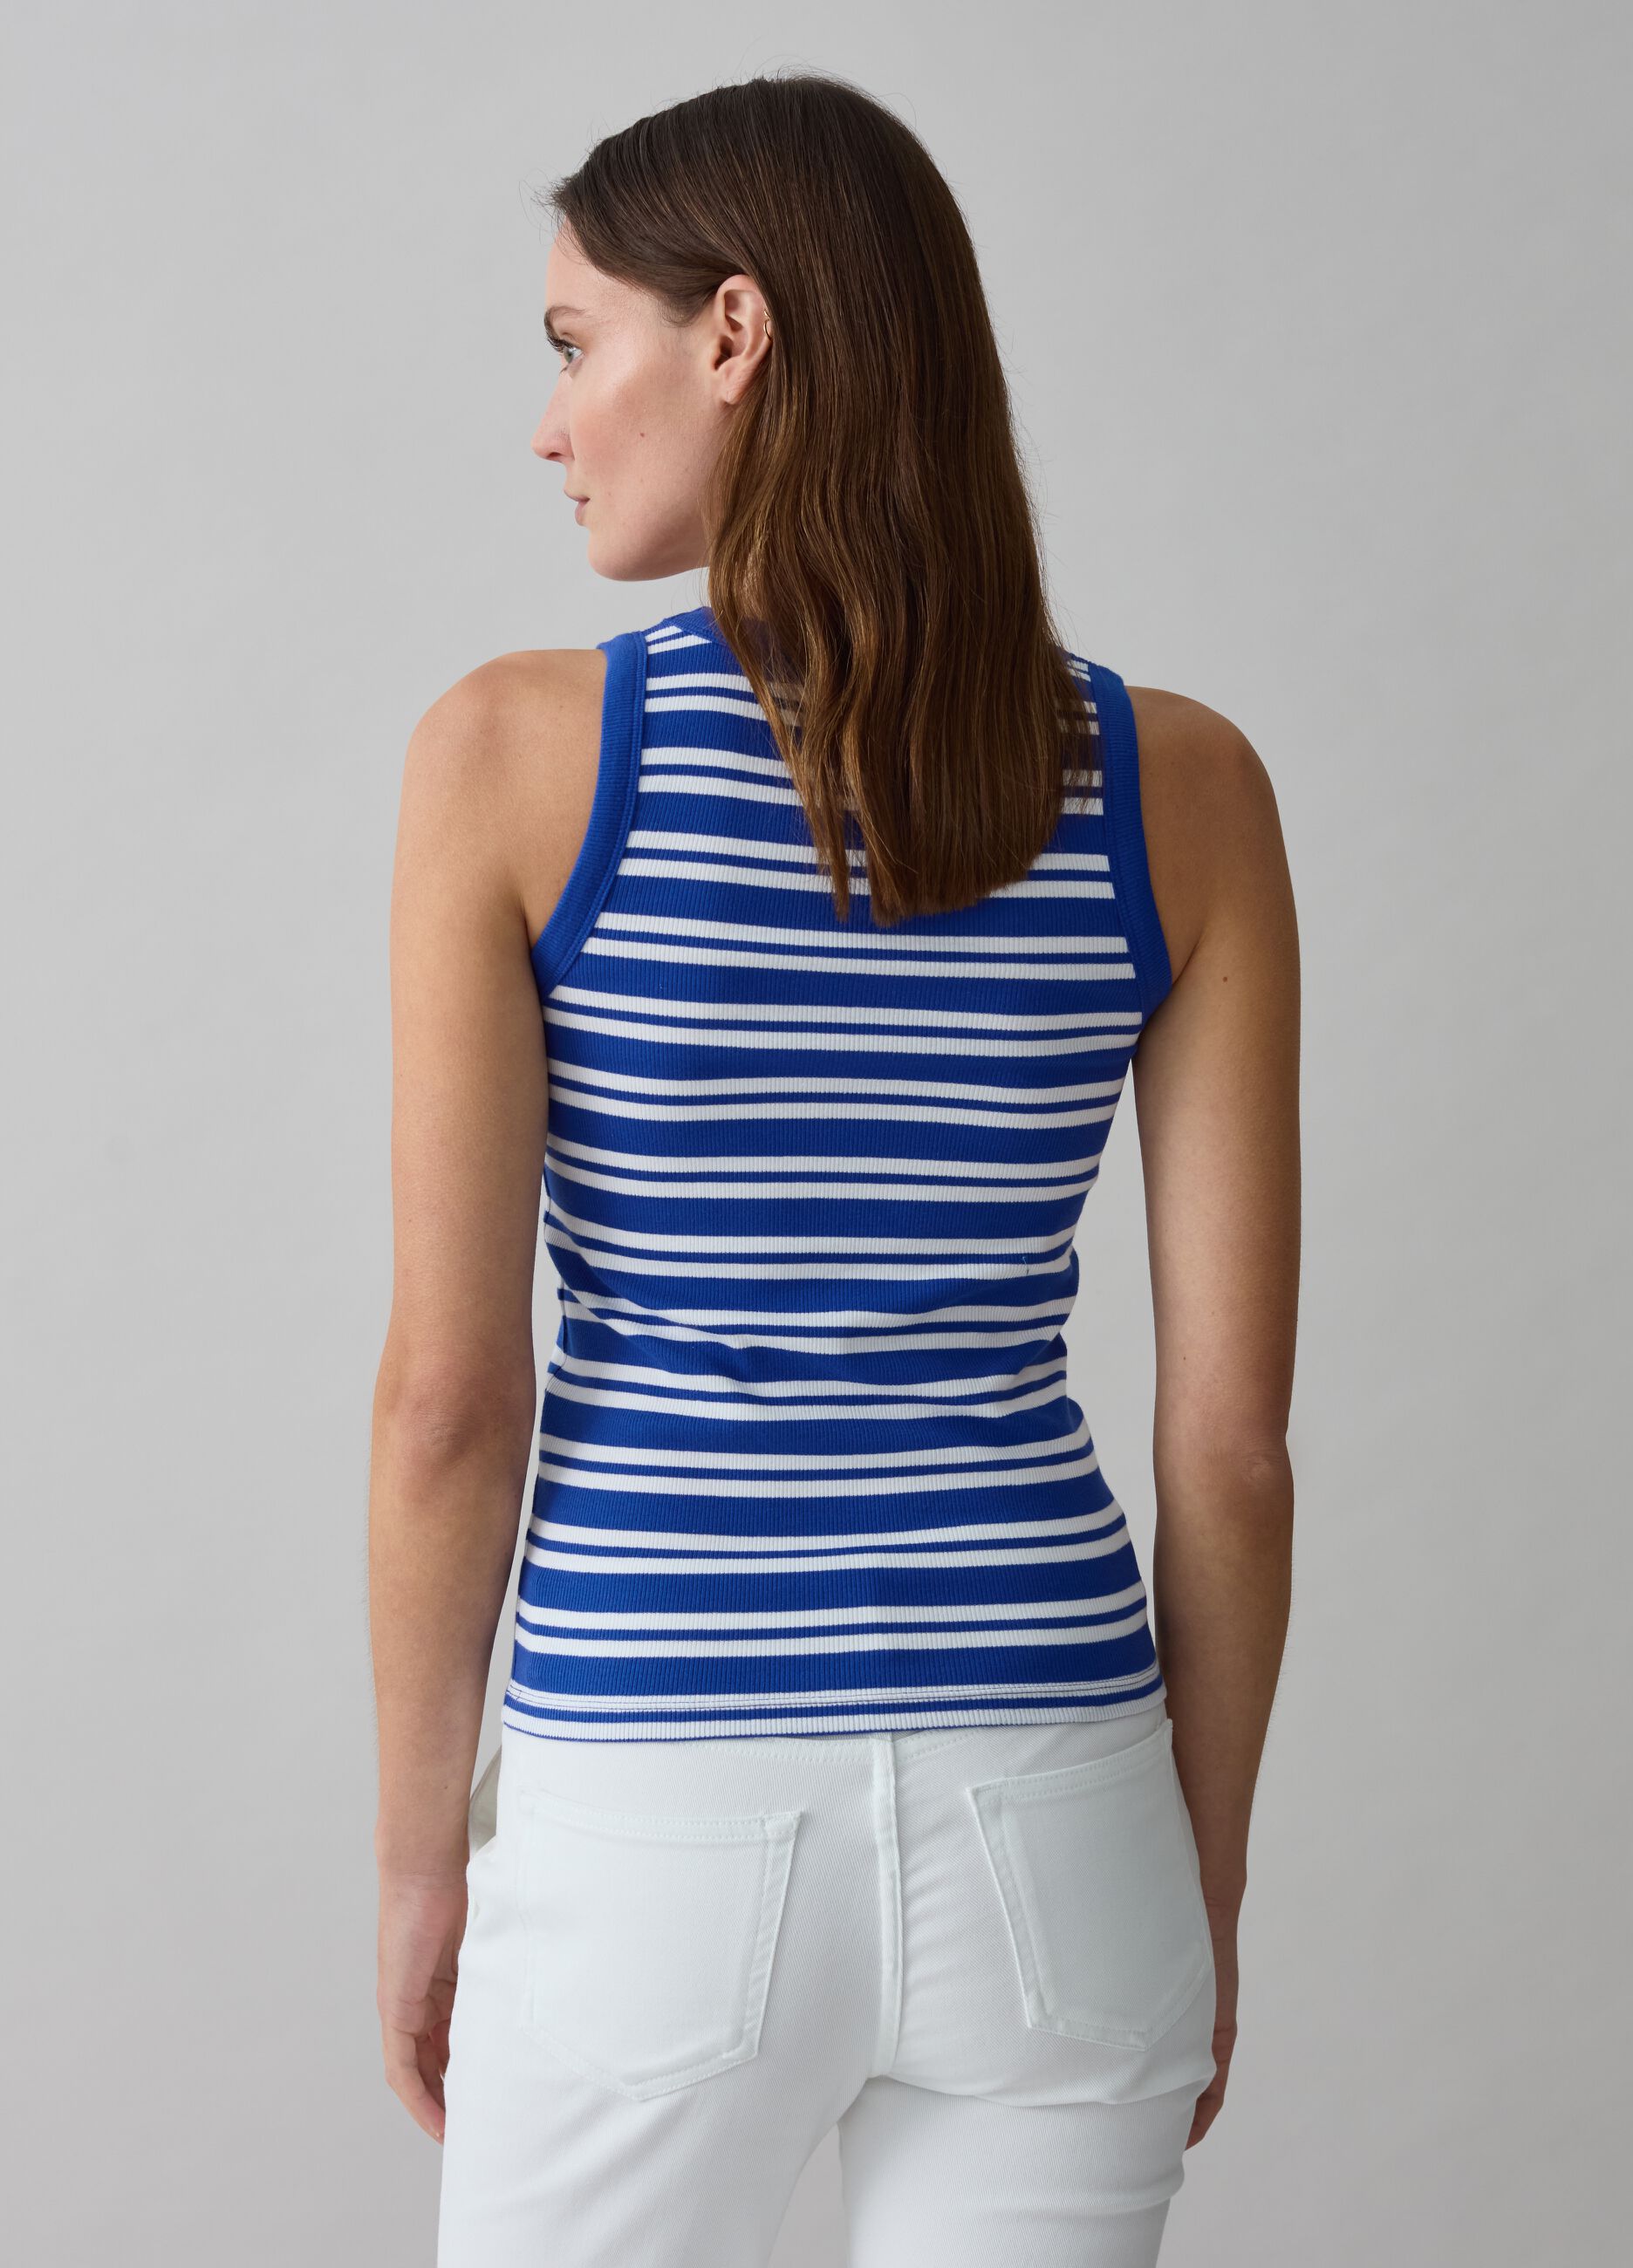 Ribbed tank top with striped pattern